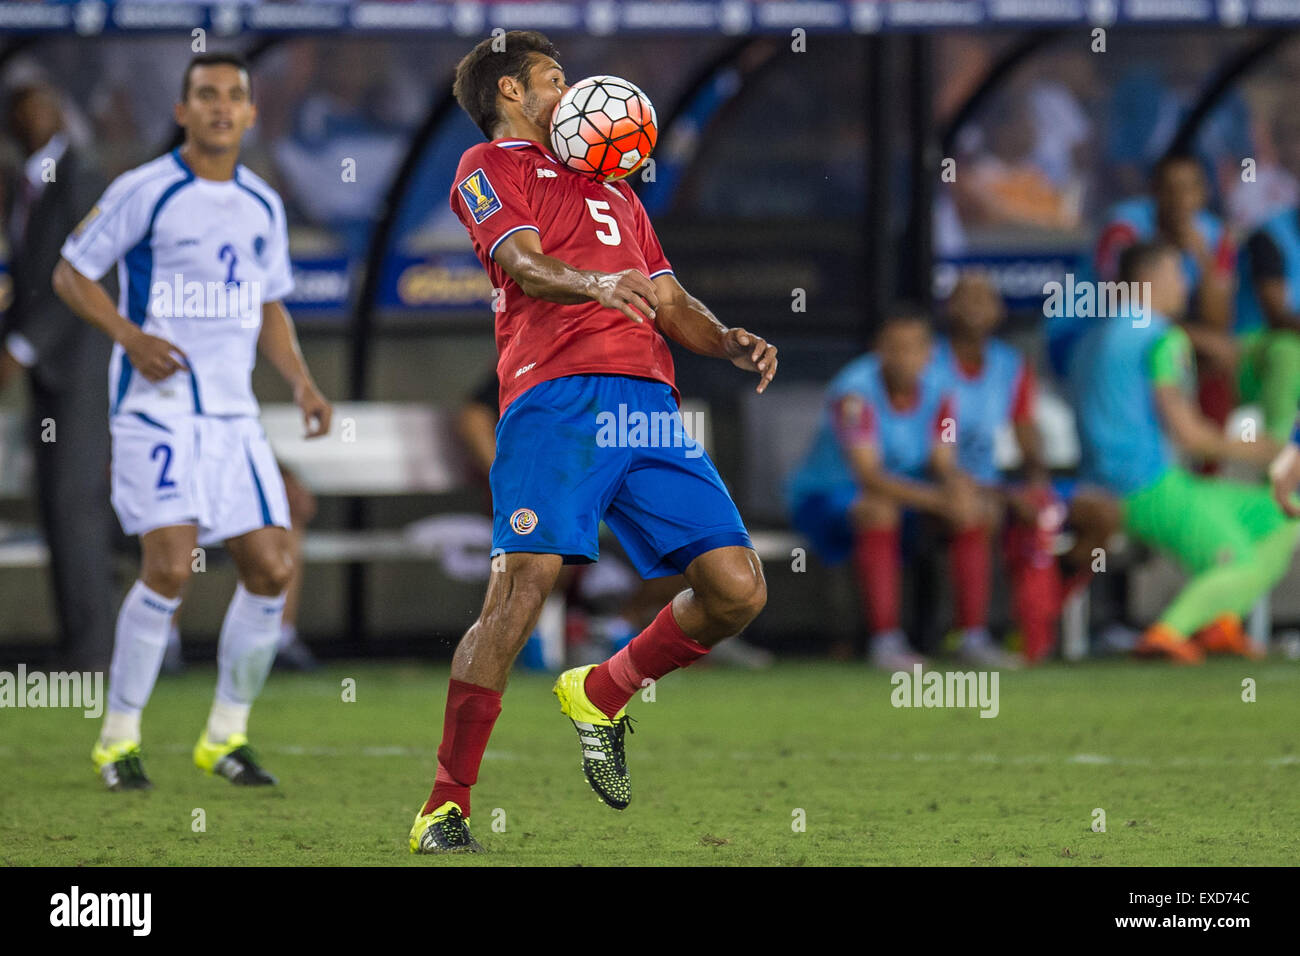 Houston, Texas, USA. 11th July, 2015. Costa Rica midfielder Celso Borges (5) controls the ball during the 2nd half of an international CONCACAF Gold Cup soccer match between Costa Rica and El Salvador at BBVA Compass Stadium in Houston, TX. The game ended in a 1-1 draw. Credit:  Cal Sport Media/Alamy Live News Stock Photo